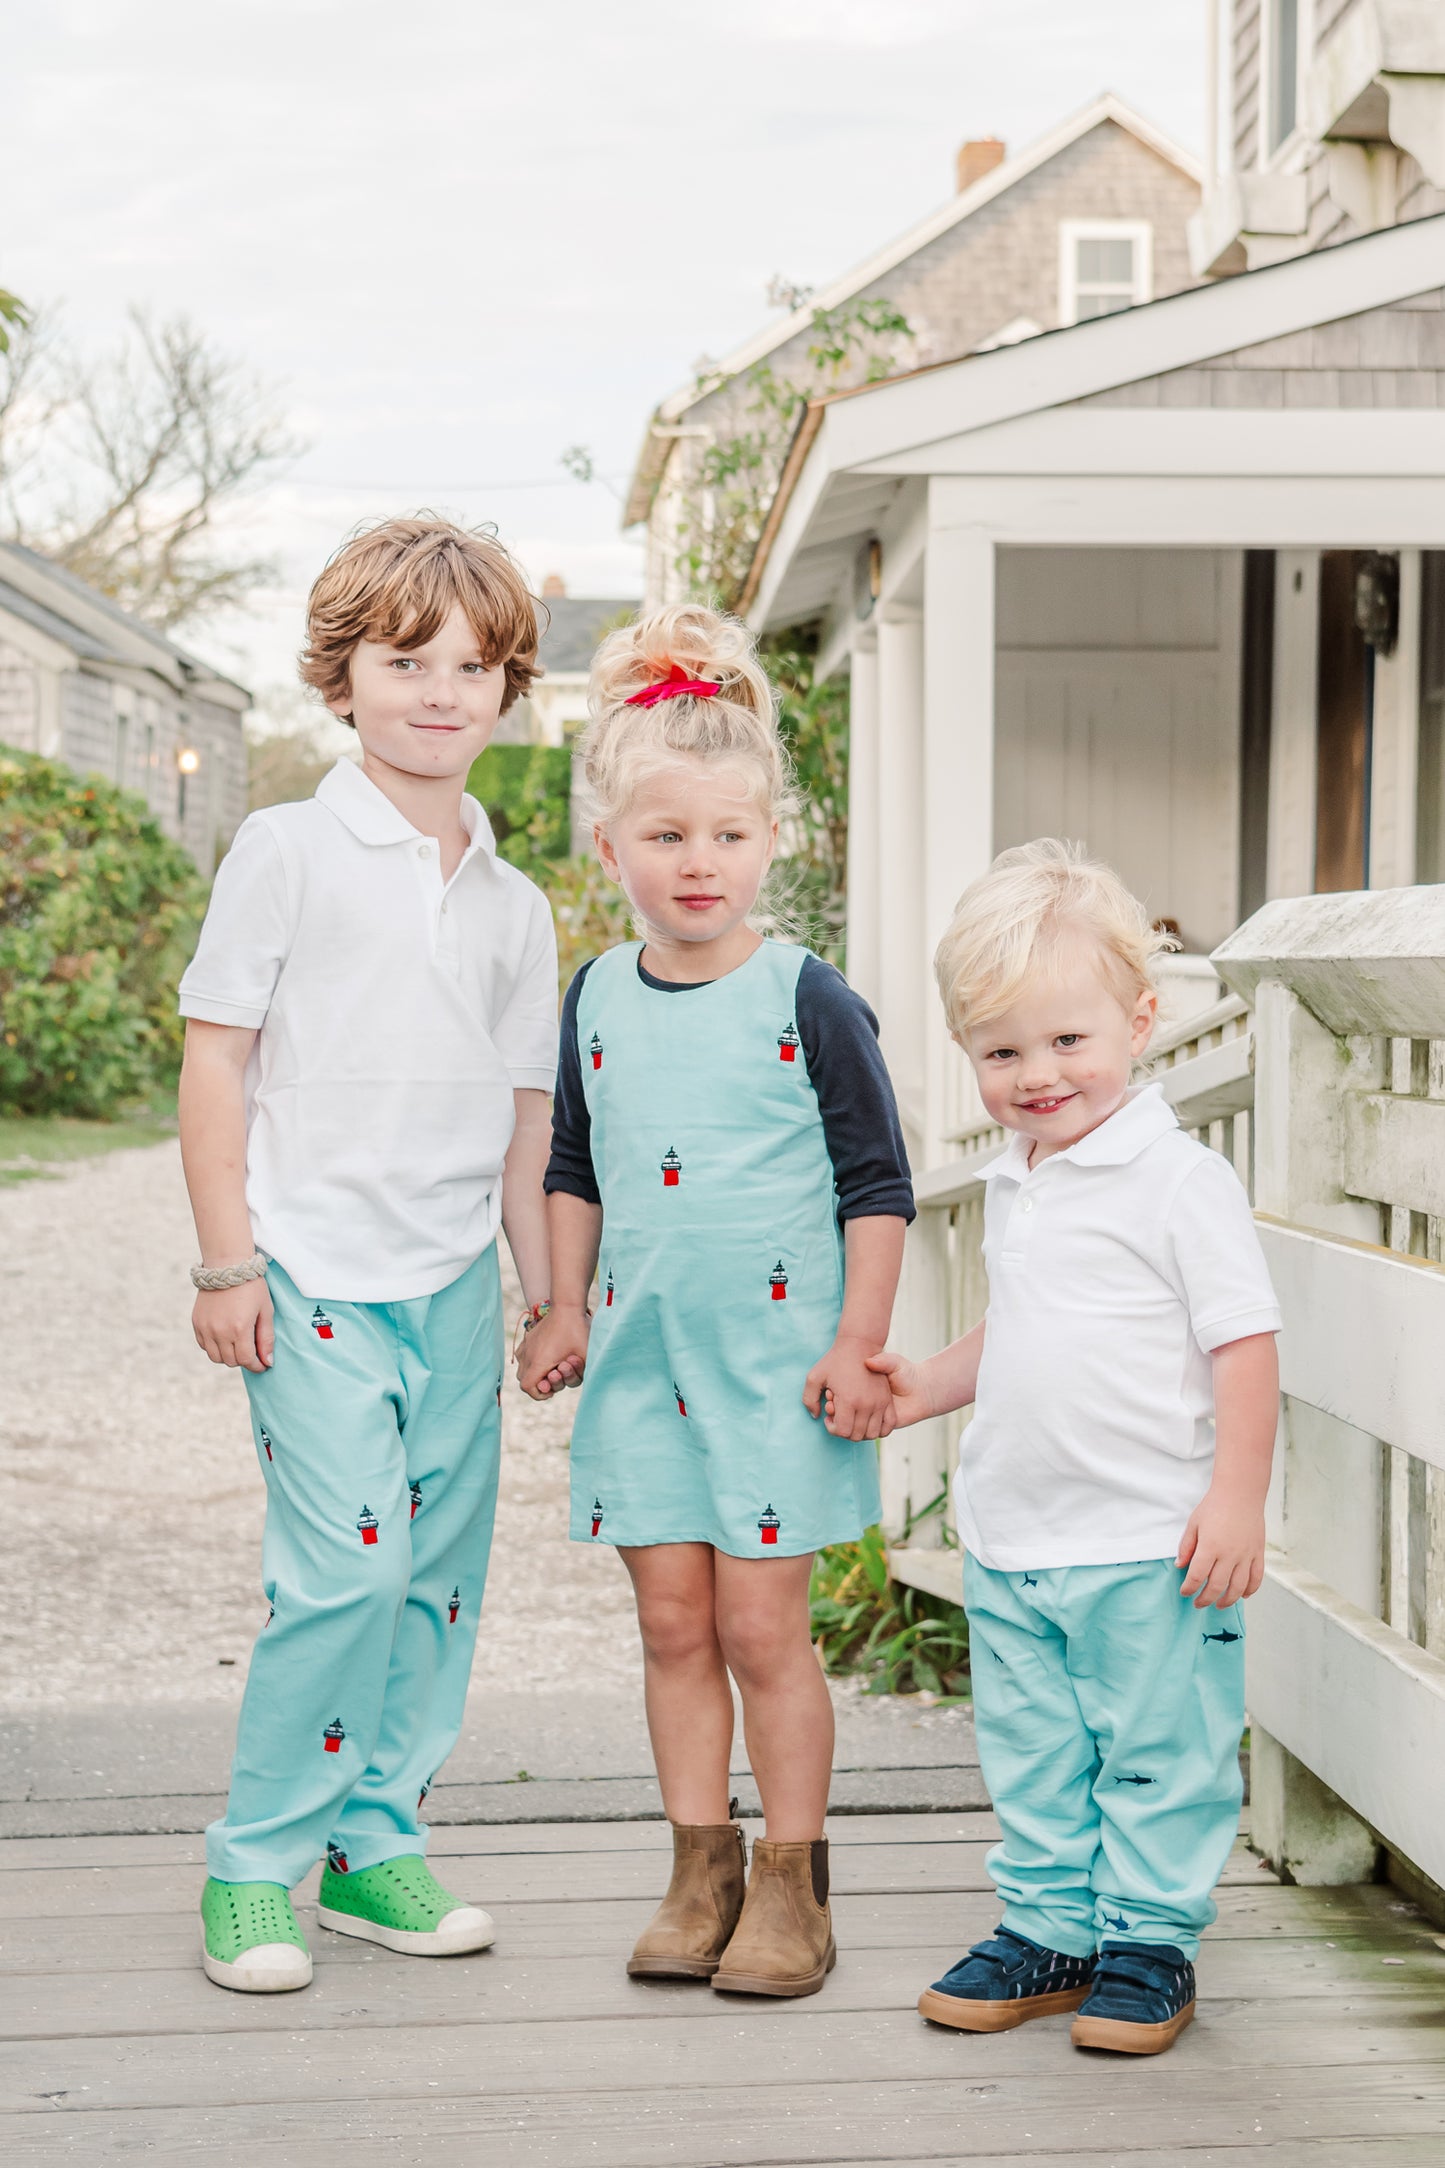 Turquoise Corduroy Jumper Dress with Embroidered Turquoise Corduroy Pants with Embroidered Duxbury Bay Lighthouse